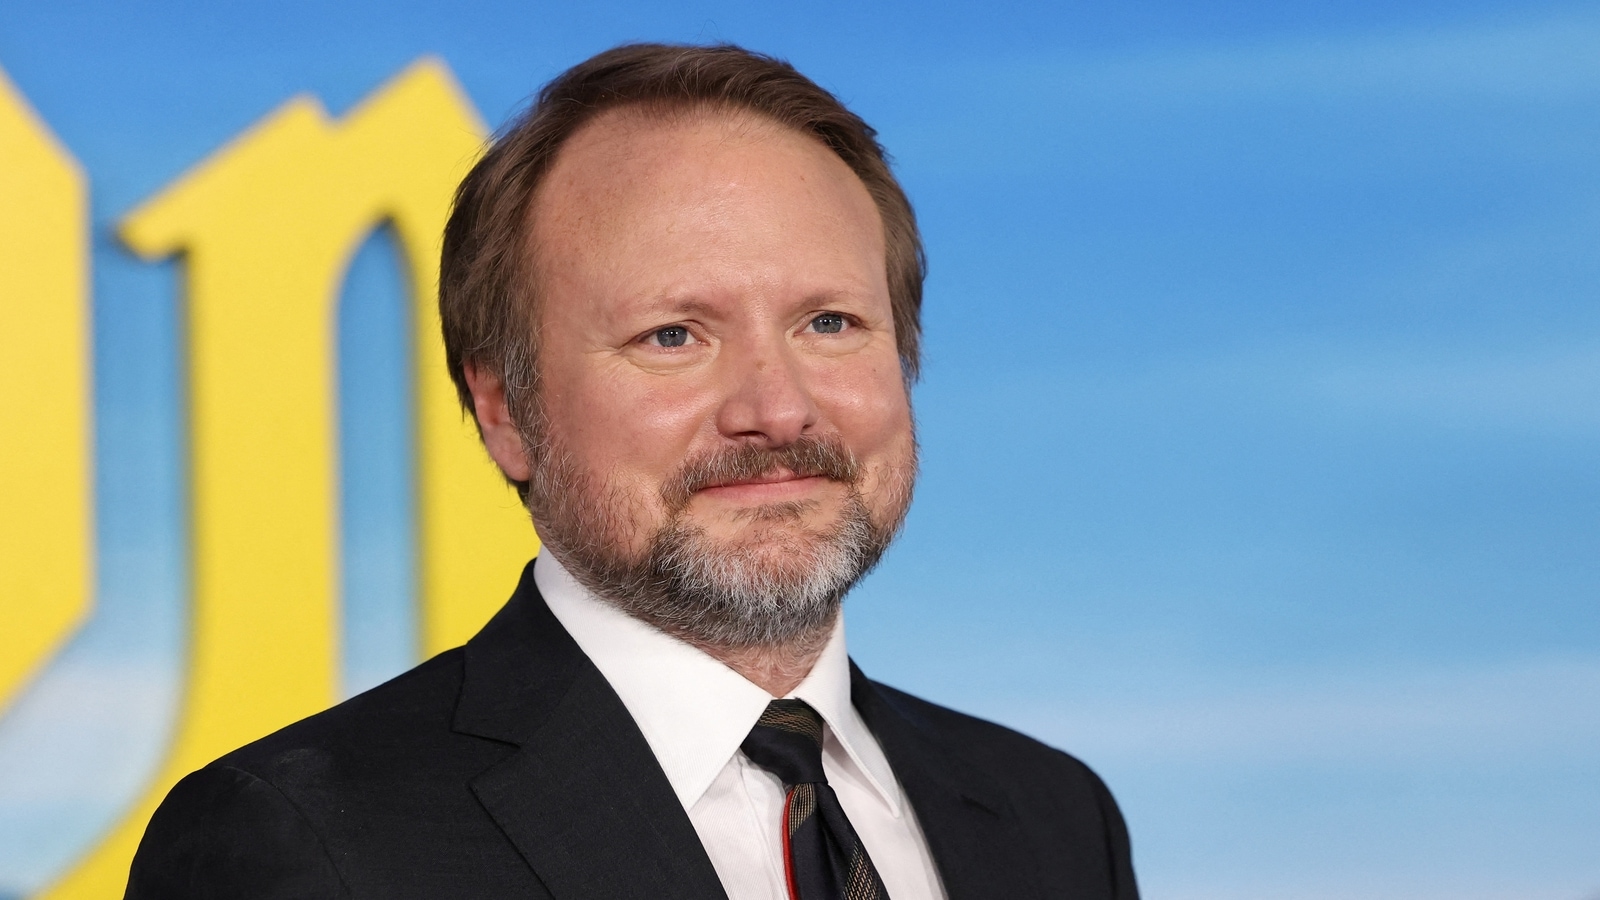 Rian Johnson to Create New Star Wars Trilogy